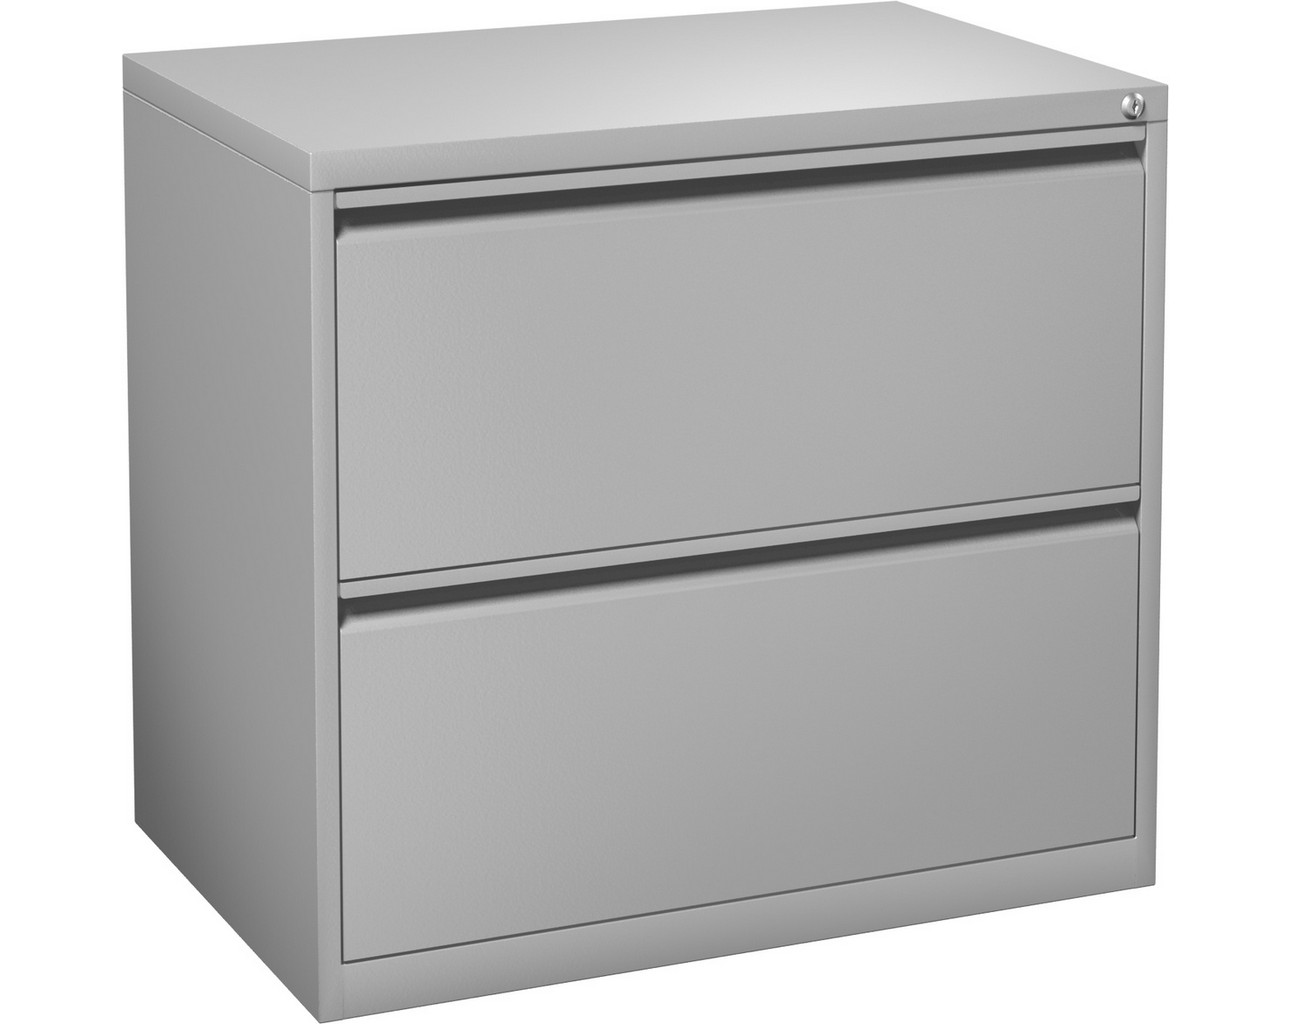 Steelwise Lateral Filing Cabinet – 2 Drawer in Grey